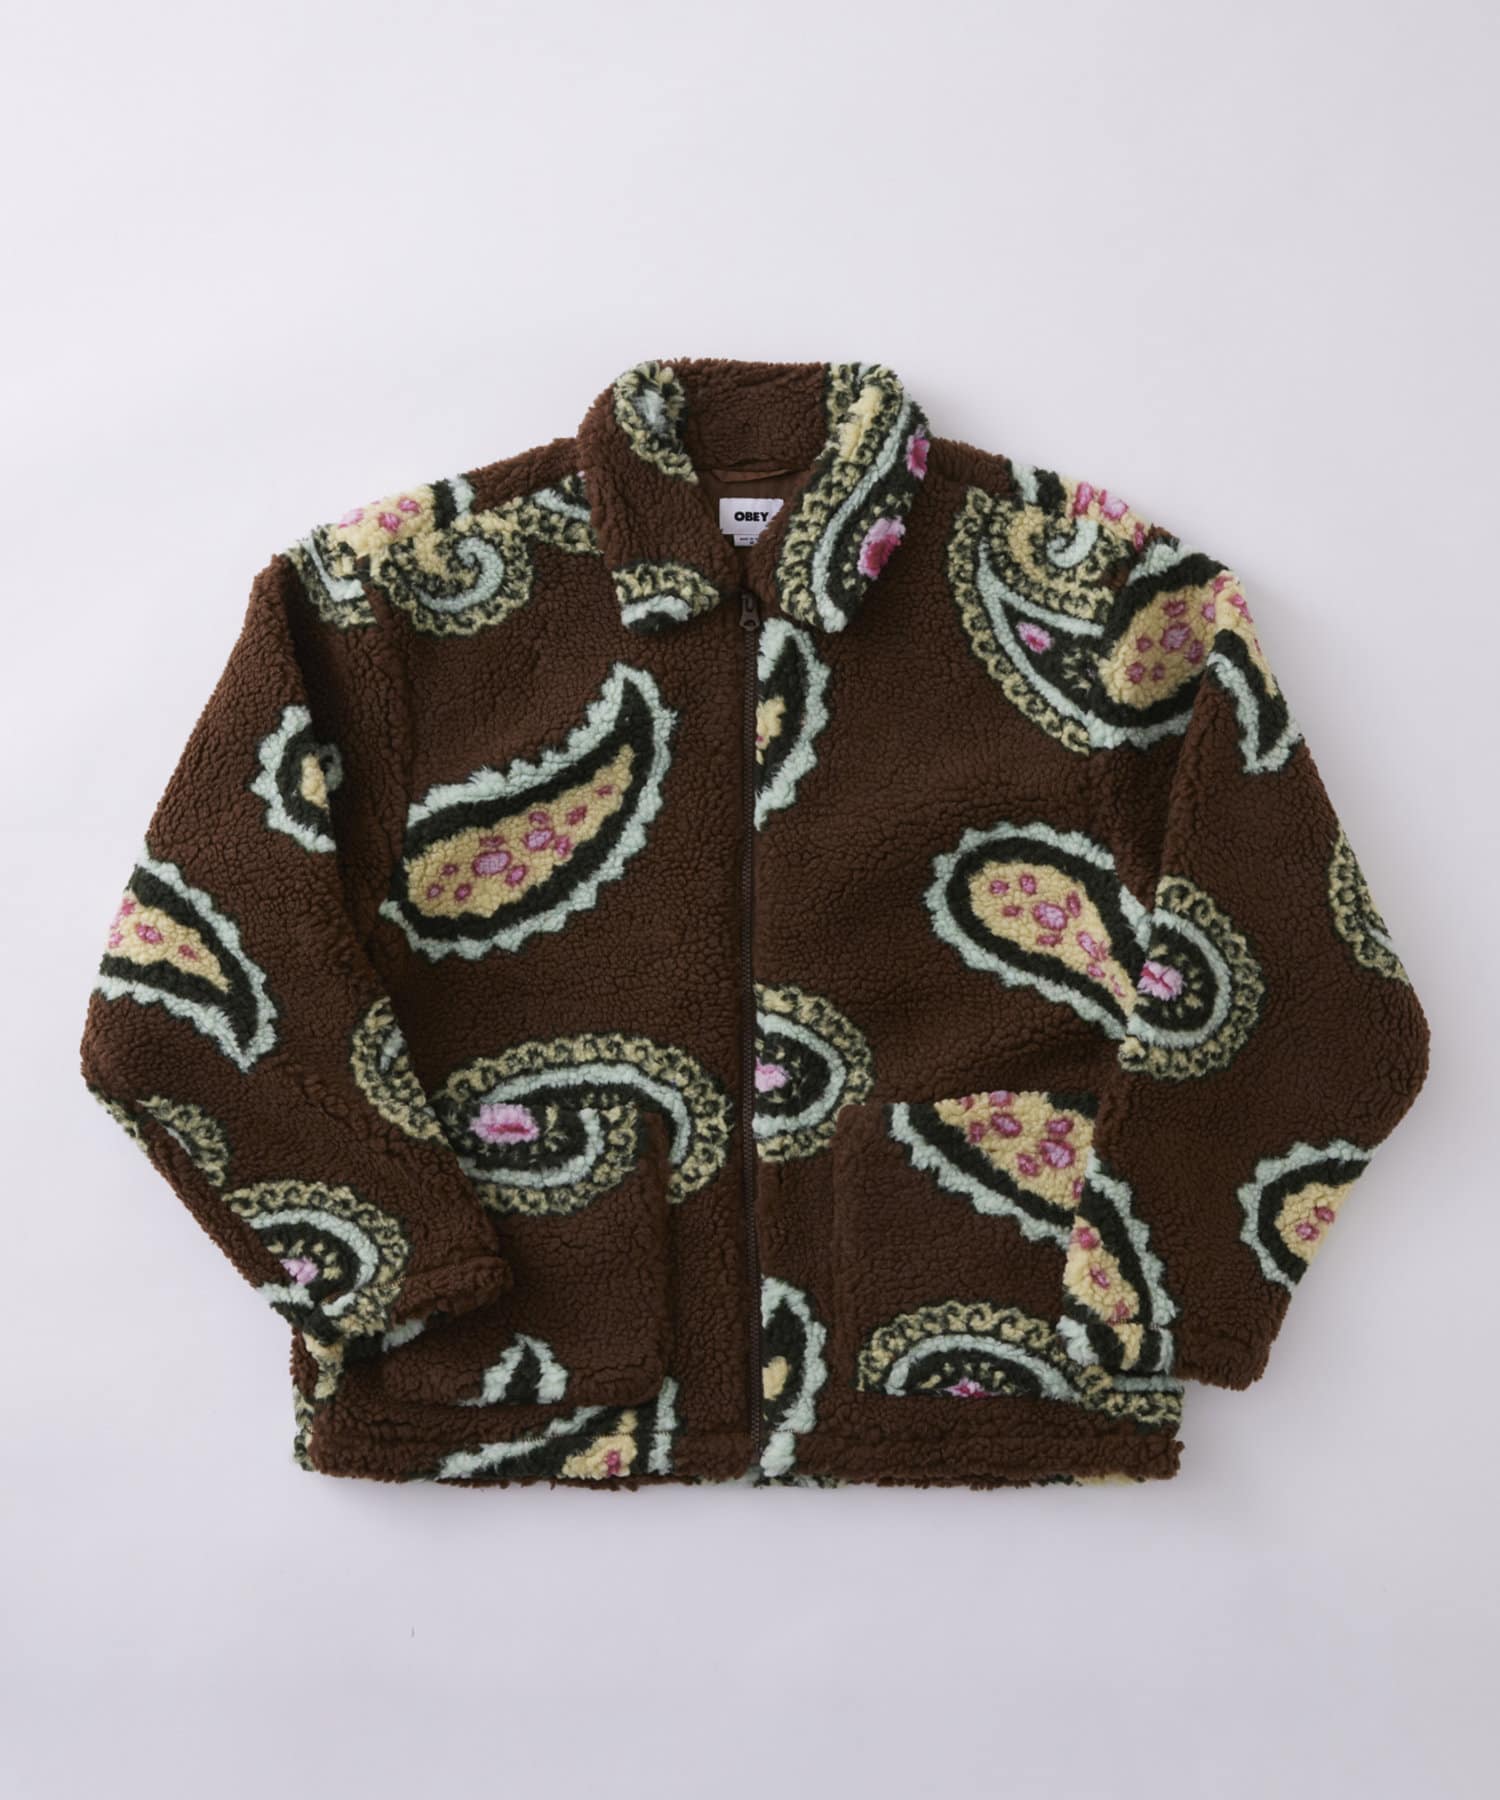 WHO’S WHO gallery(フーズフーギャラリー) OBEY PAISLEY SHERPA JACKET